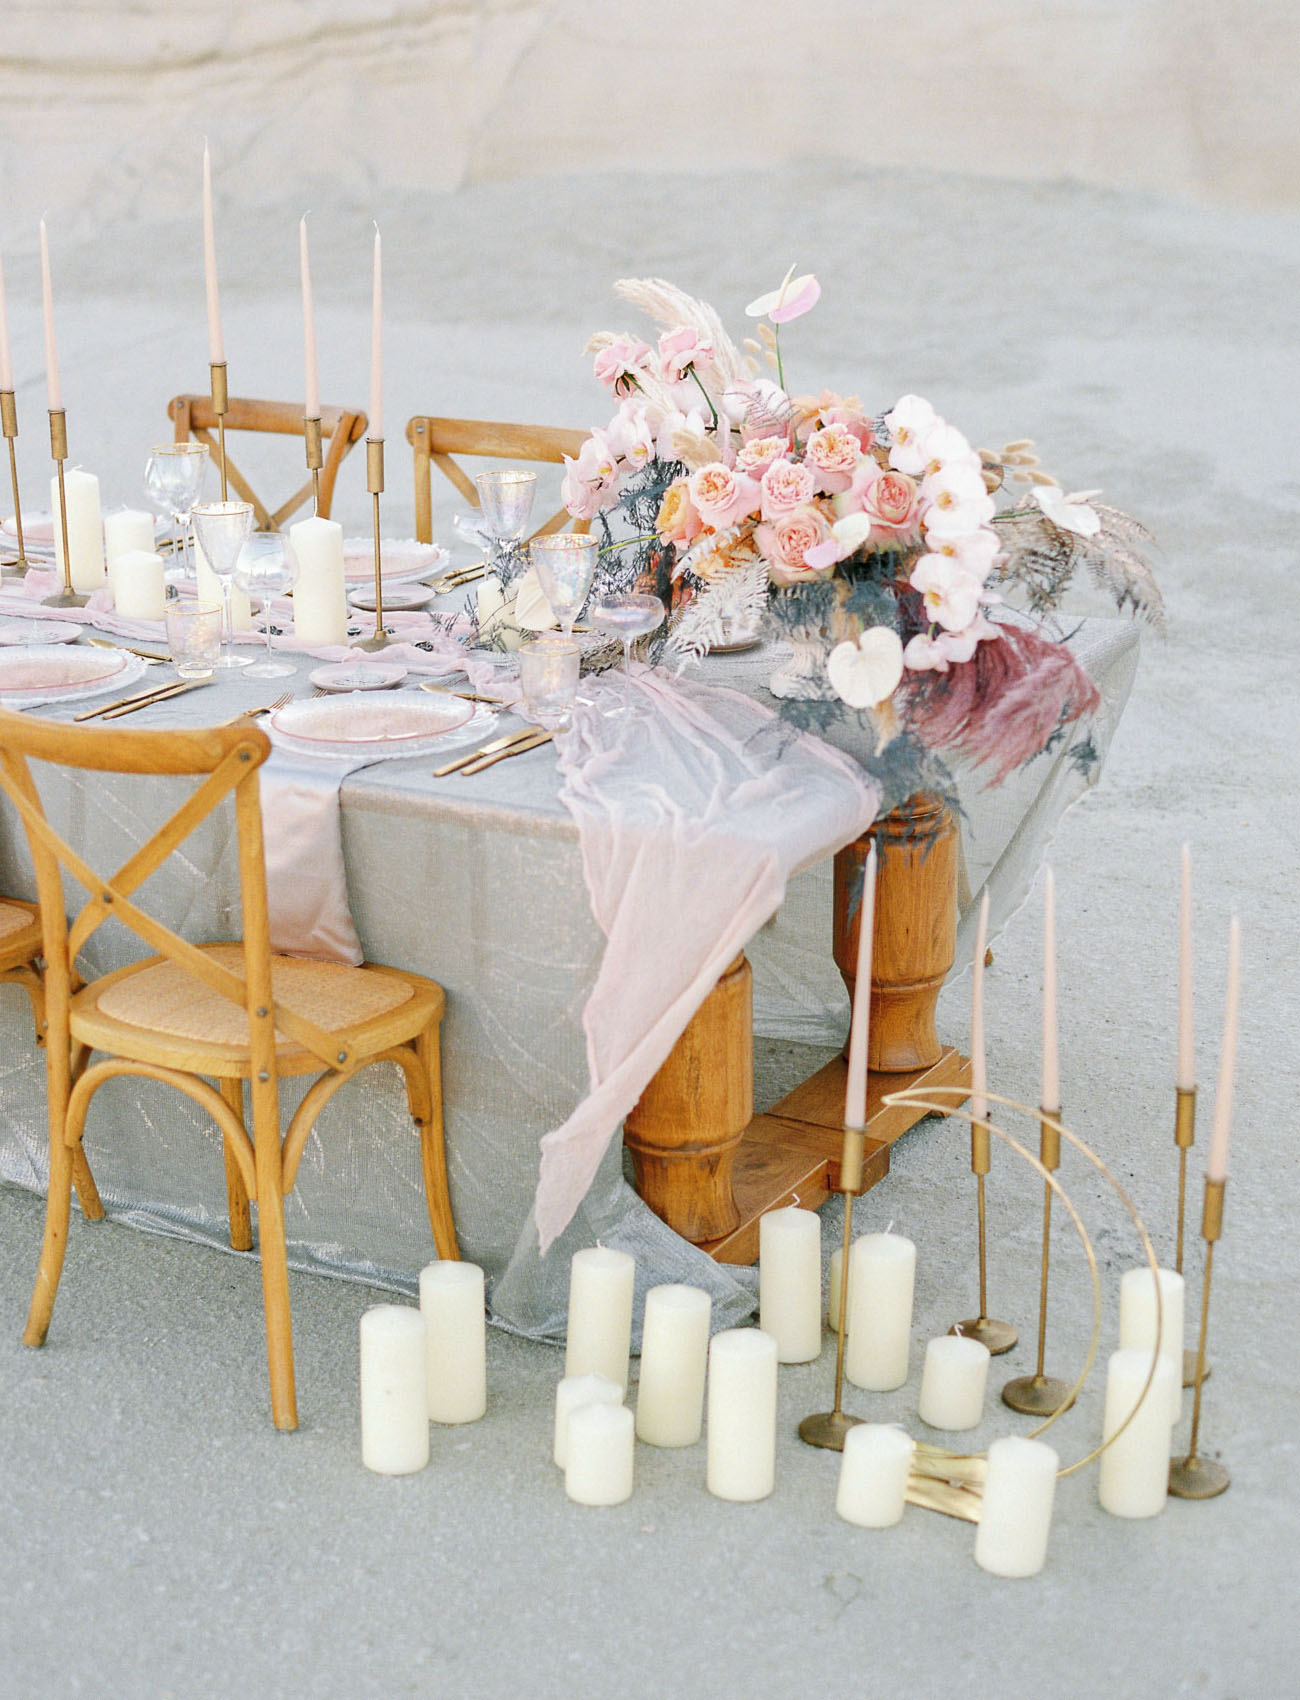 The table was decorated with delicate linens, pastel florals, candles and pink glass chargers